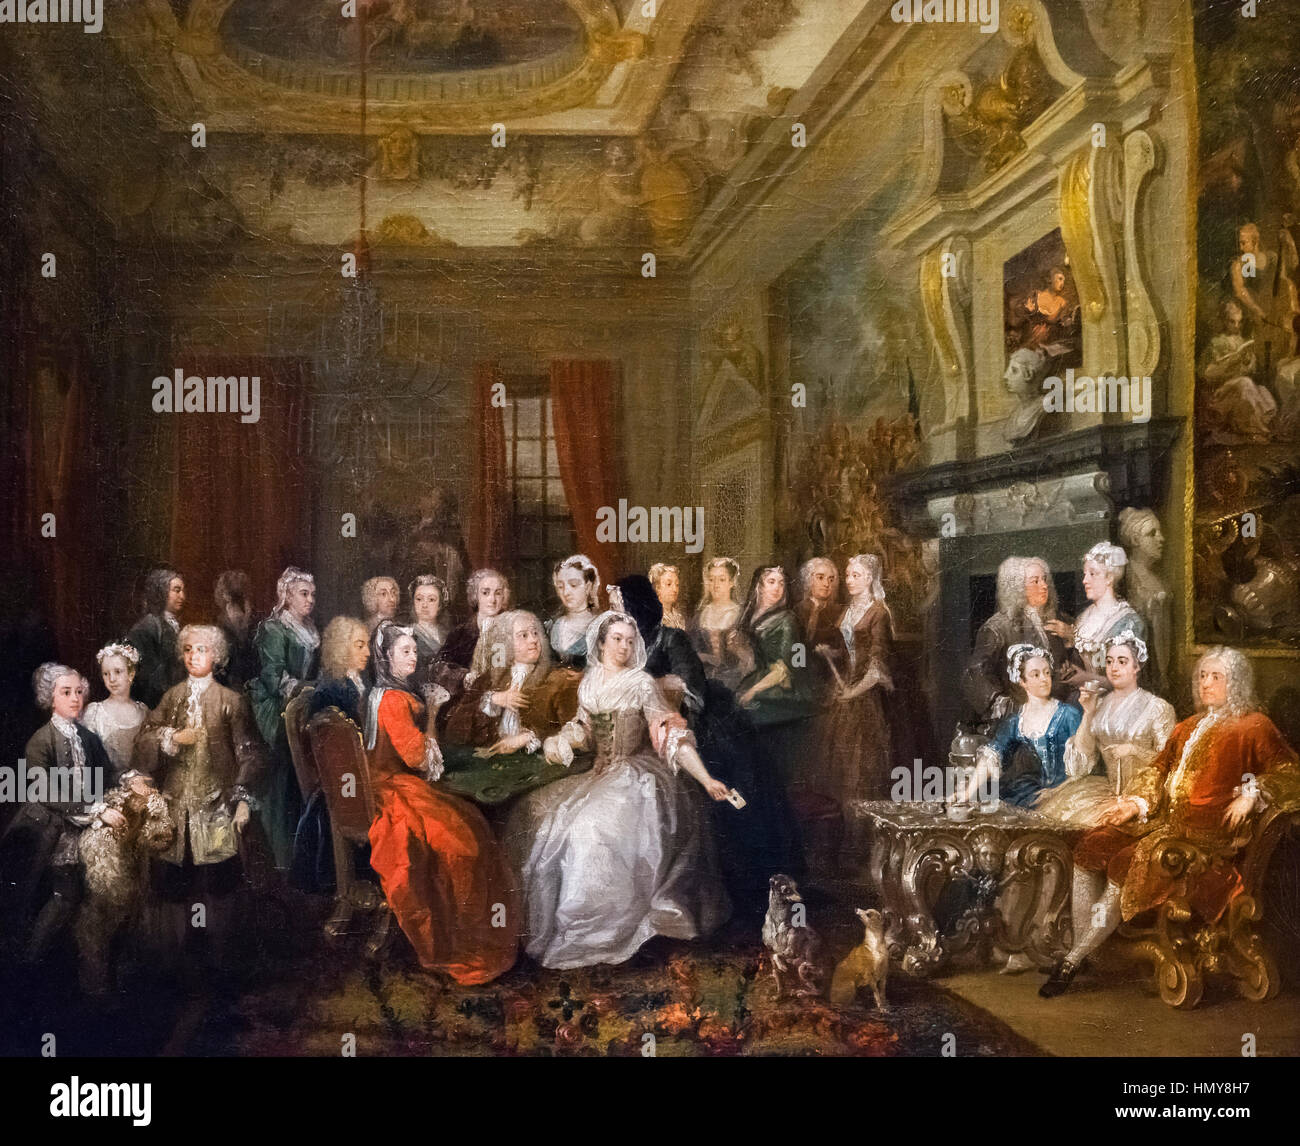 Hogarth painting. 'Assembly at Wanstead House' by William Hogarth (1697-1764), oil on canvas, c.1728-31. The painting shows Lord and Lady Castlemaine celebrating their 25th wedding anniversary with friends and family Stock Photo